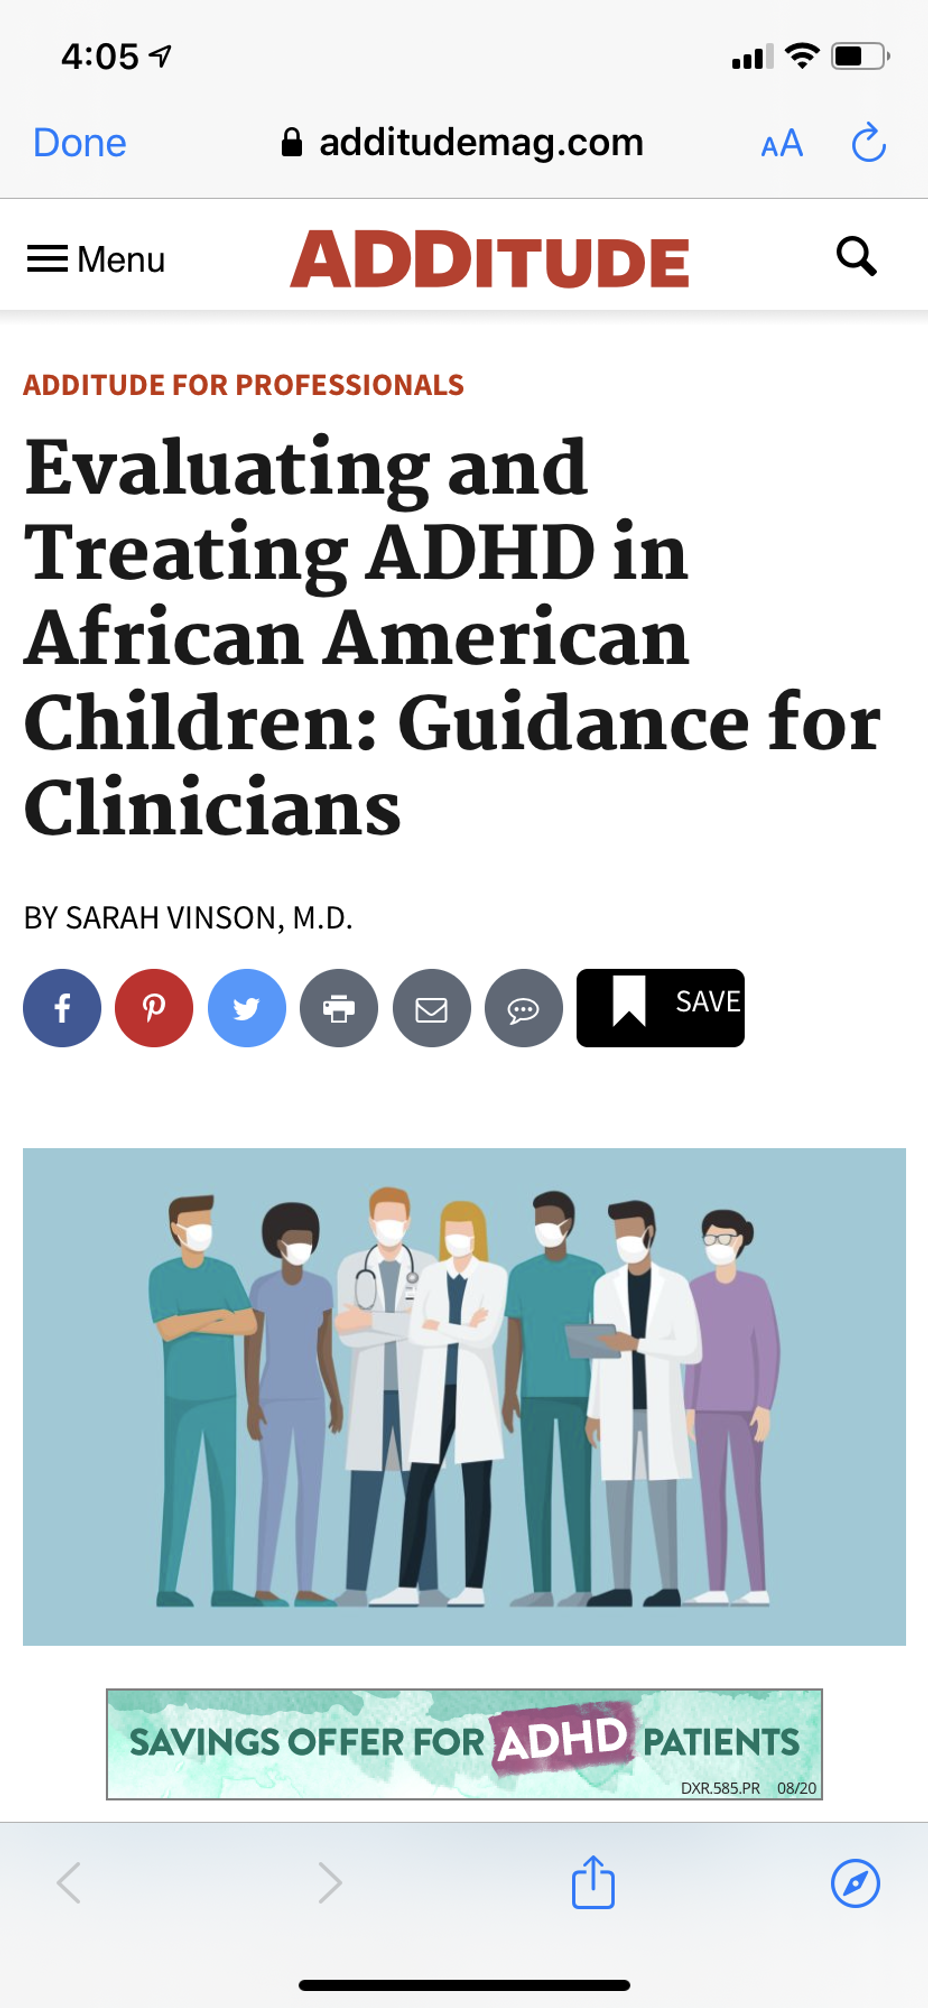 <p>Evaluating and Treating <a href="https://themighty.com/topic/adhd/?label=ADHD" class="tm-embed-link  tm-autolink health-map" data-id="5b23ce5800553f33fe98c48e" data-name="ADHD" title="ADHD" target="_blank">ADHD</a> in African American Children: Guidance for Clinicians</p>